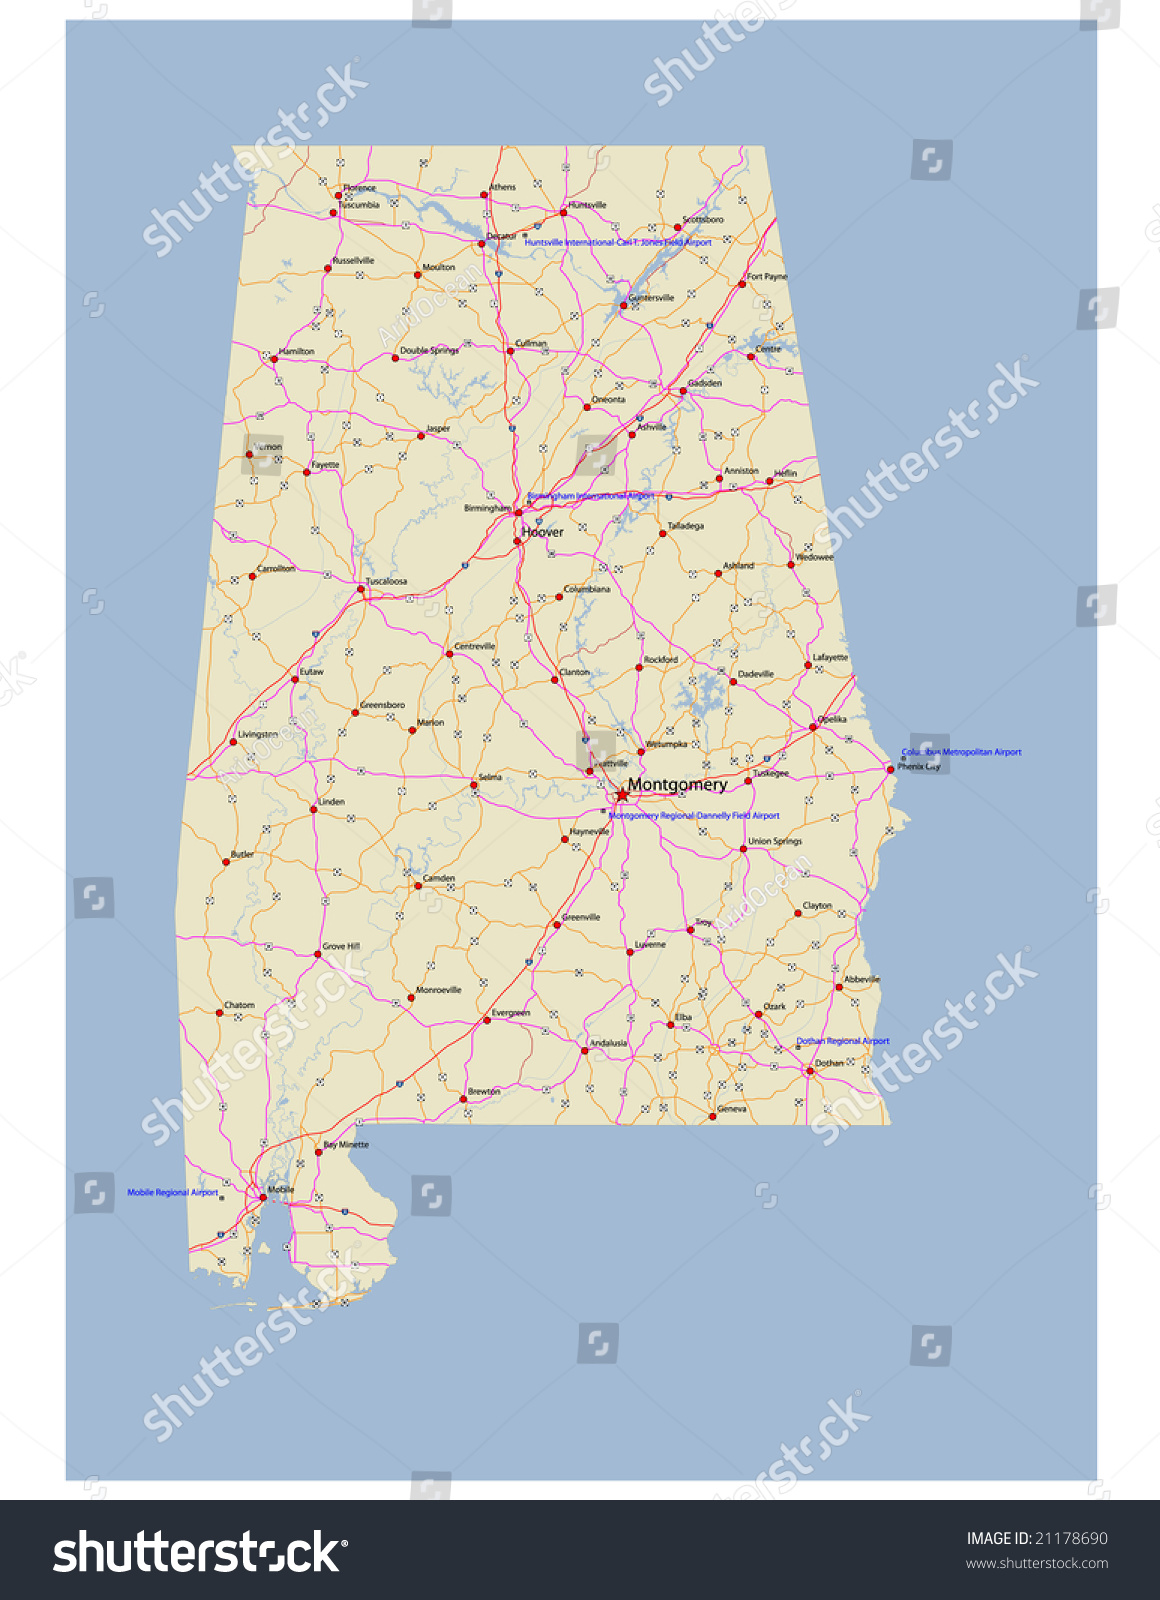 Alabama Transportation Vector Map. With Rivers, Selected Cities ...